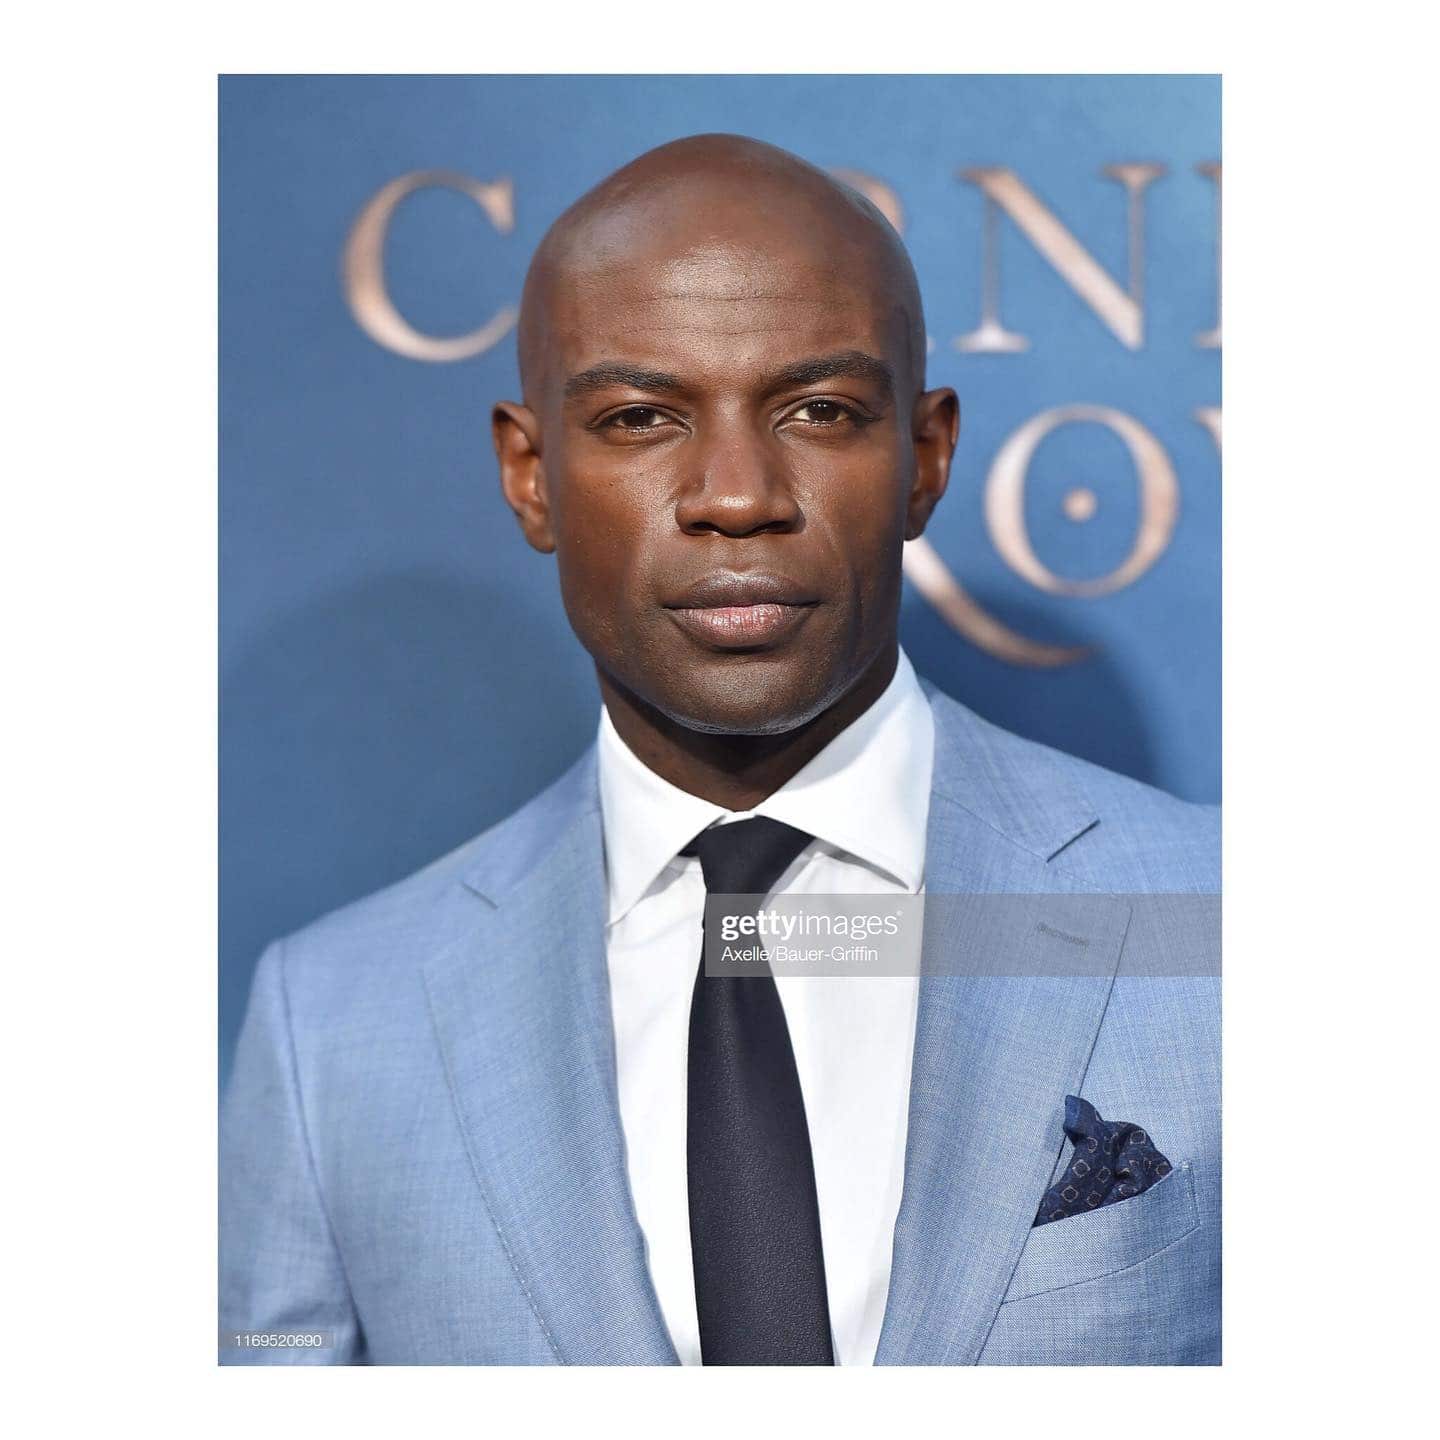 🦋 @thedavidgyasi at last nights LA premiere of @carnivalrow which launches on 30th August 🦋 .
.
.
.
📸: @gettyimages : @hollyevawhite .
.